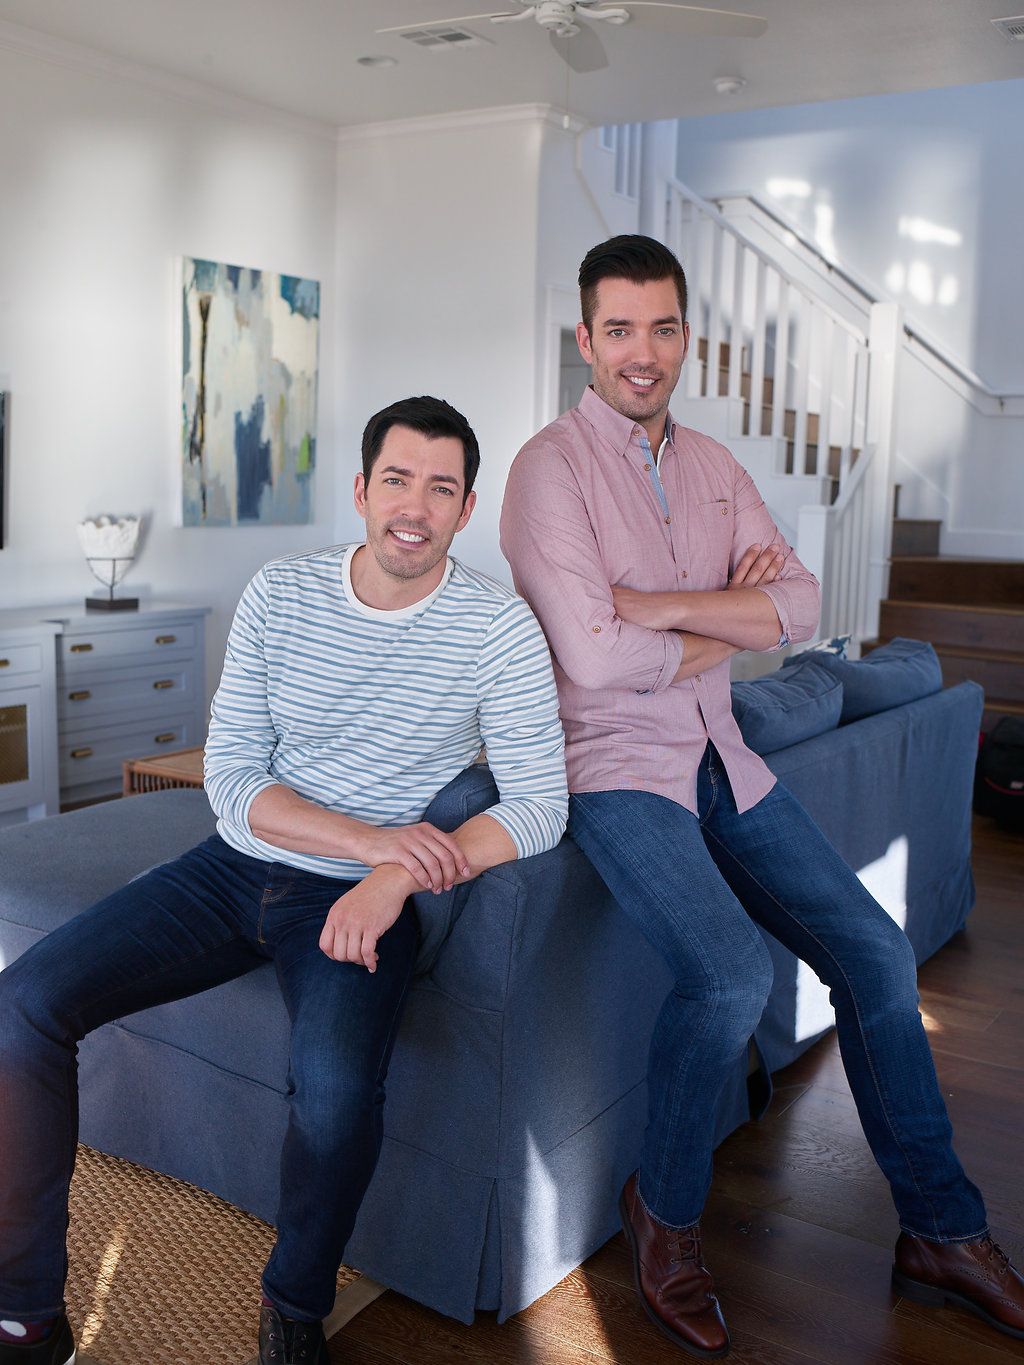 Elegant drew designs Property Brothers Drew And Jonathan Scott Launch Casaza An Decor Shopping Platform With Curated Designs